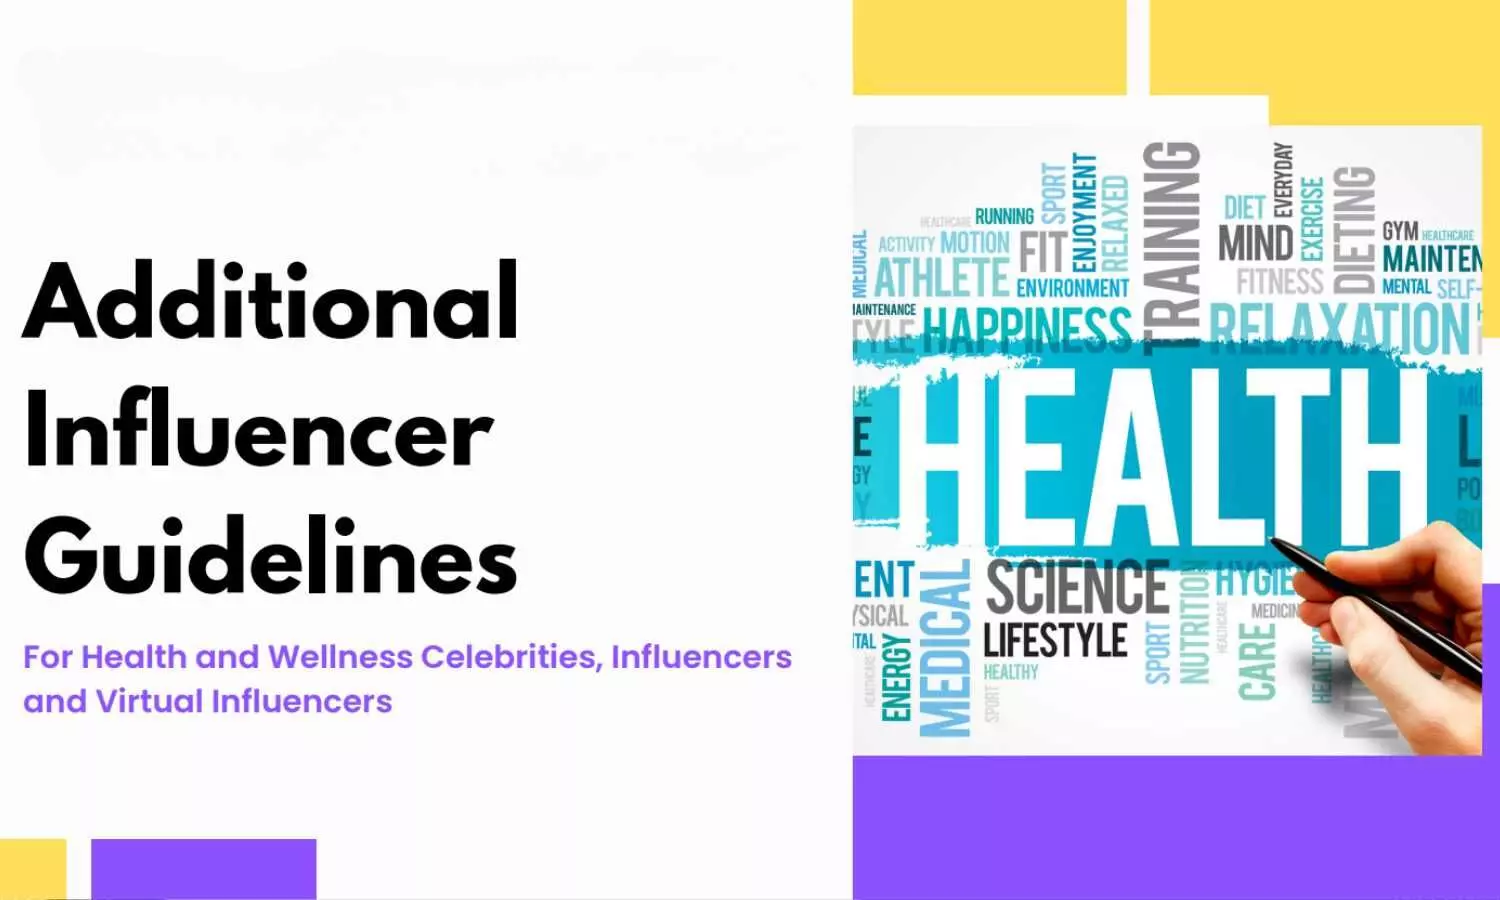 Centre releases additional guidelines for Health and Wellness Celebrities, Influencers and Virtual Influencers